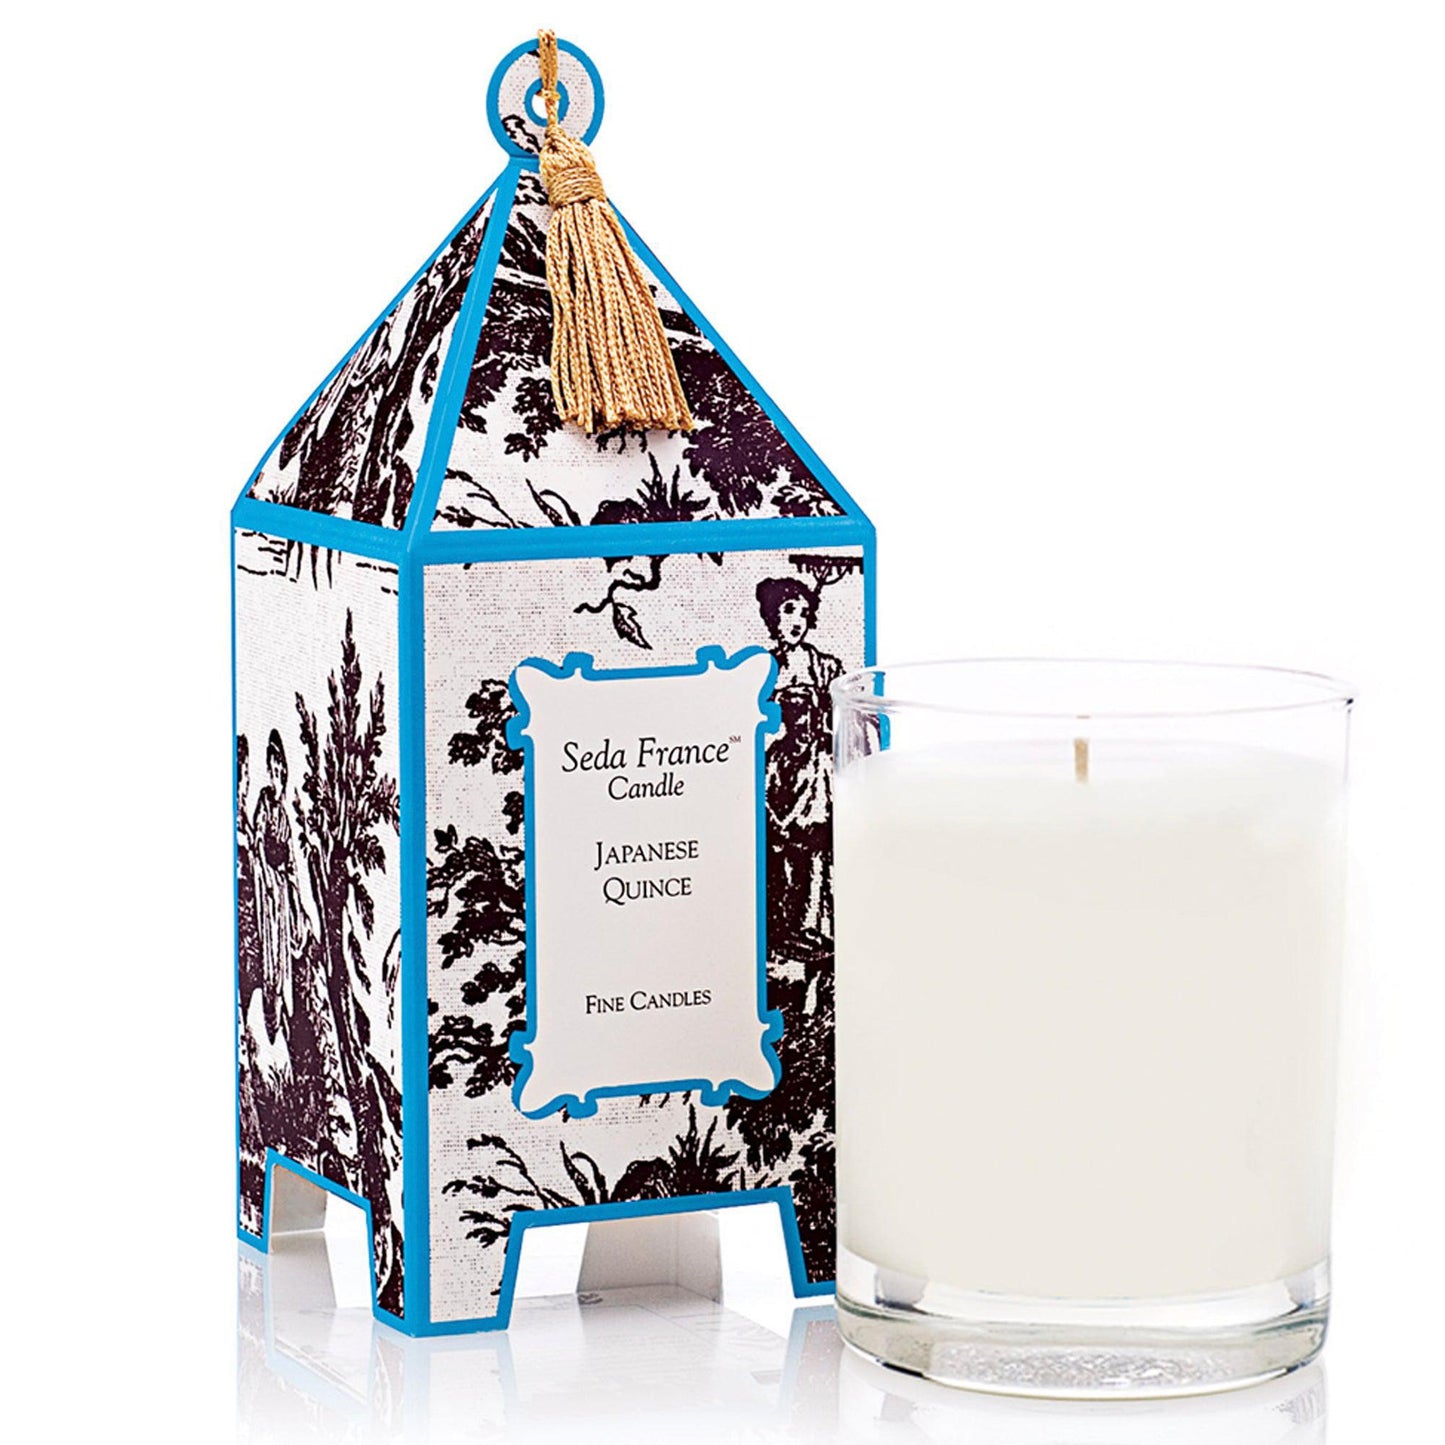 Seda France Japanese Quince Toile Pagoda Candle